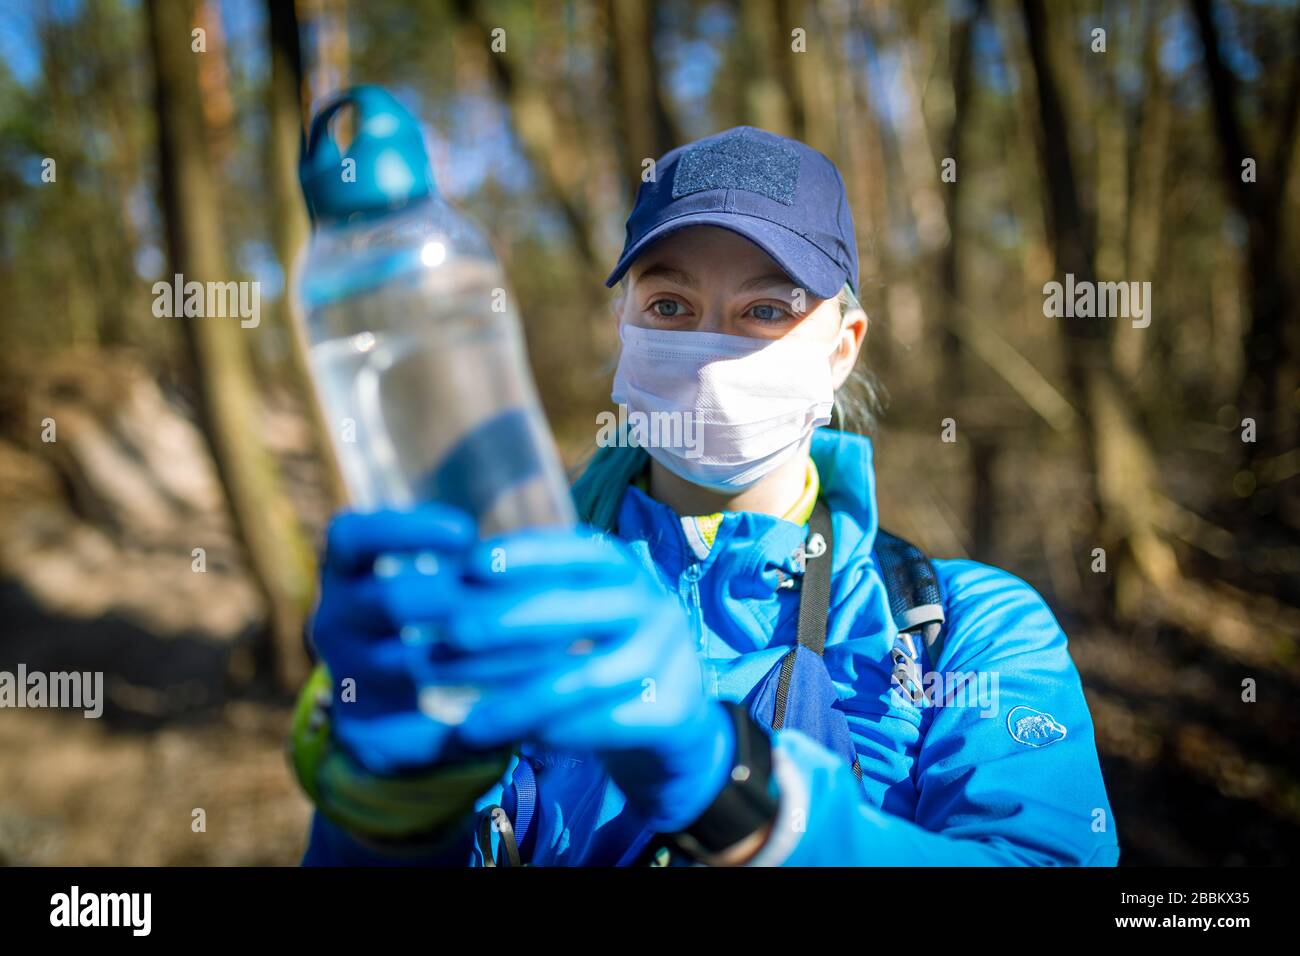 Ecologist taking water samples from a natural source in protective gloves and mask Stock Photo